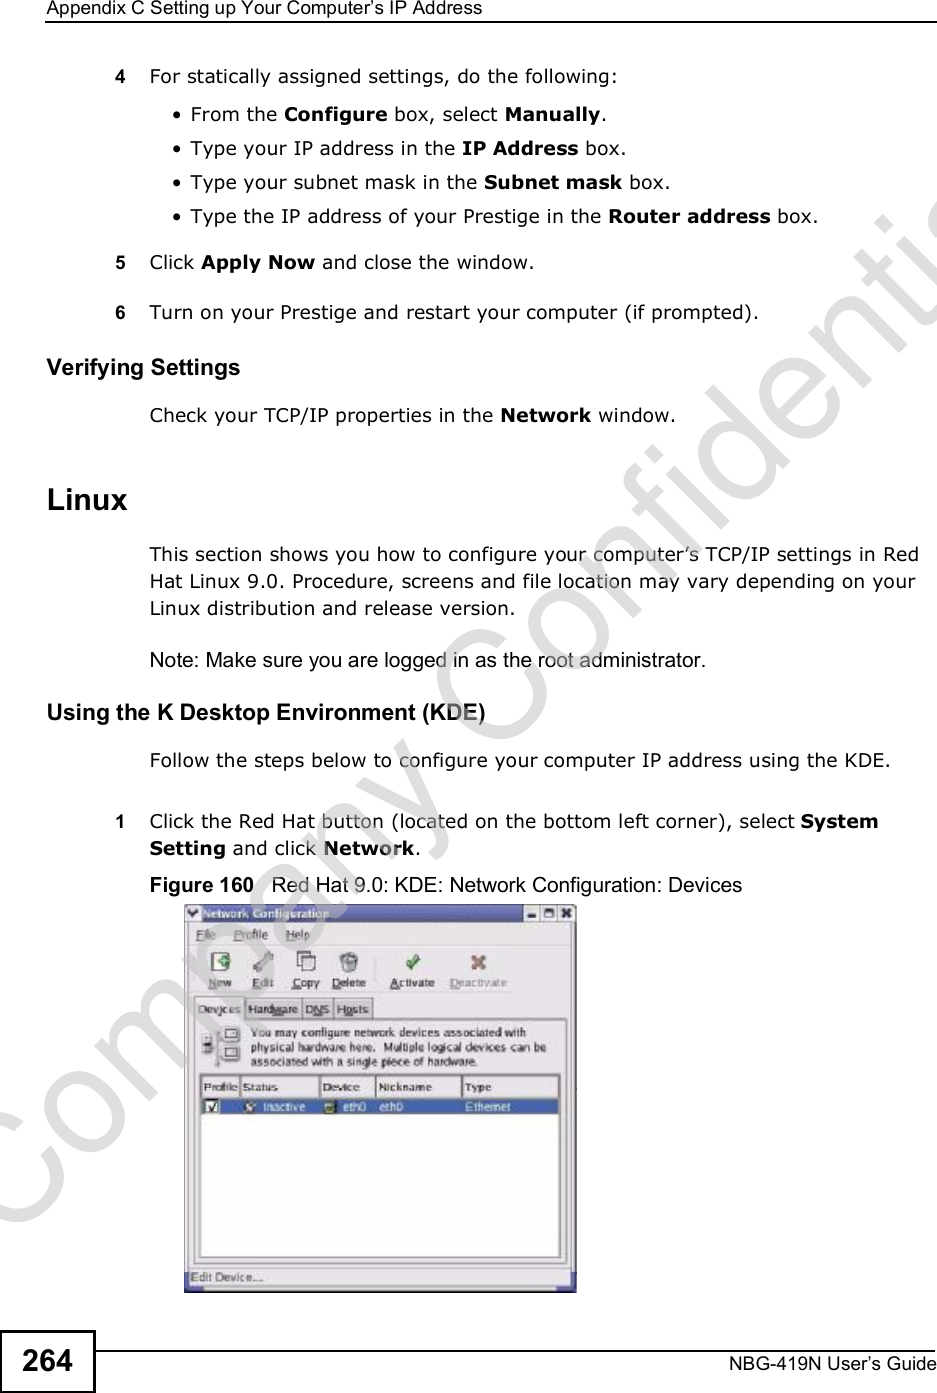 Appendix CSetting up Your Computer s IP AddressNBG-419N User s Guide2644For statically assigned settings, do the following: From the Configure box, select Manually. Type your IP address in the IP Address box. Type your subnet mask in the Subnet mask box. Type the IP address of your Prestige in the Router address box.5Click Apply Now and close the window.6Turn on your Prestige and restart your computer (if prompted).Verifying SettingsCheck your TCP/IP properties in the Network window.Linux This section shows you how to configure your computer!s TCP/IP settings in Red Hat Linux 9.0. Procedure, screens and file location may vary depending on your Linux distribution and release version. Note: Make sure you are logged in as the root administrator. Using the K Desktop Environment (KDE)Follow the steps below to configure your computer IP address using the KDE. 1Click the Red Hat button (located on the bottom left corner), select System Setting and click Network.Figure 160   Red Hat 9.0: KDE: Network Configuration: Devices Company Confidential